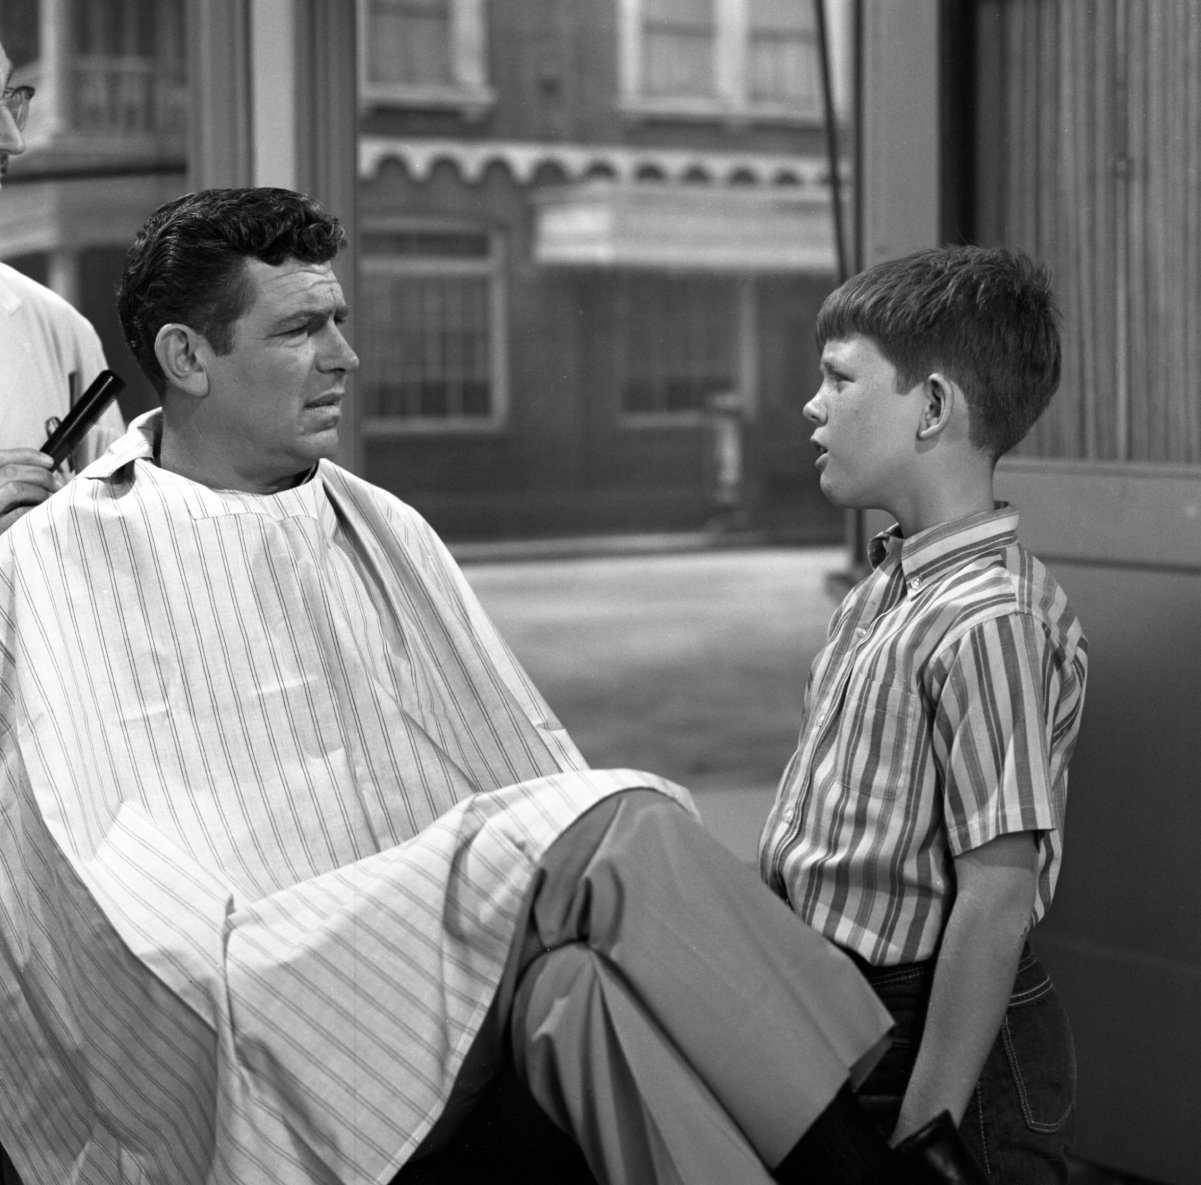 Ron Howard Revealed the Day He Was ‘Saved’ From ‘Becoming a Toxic Hollywood Brat’ on the ‘Andy Griffith Show’ Set